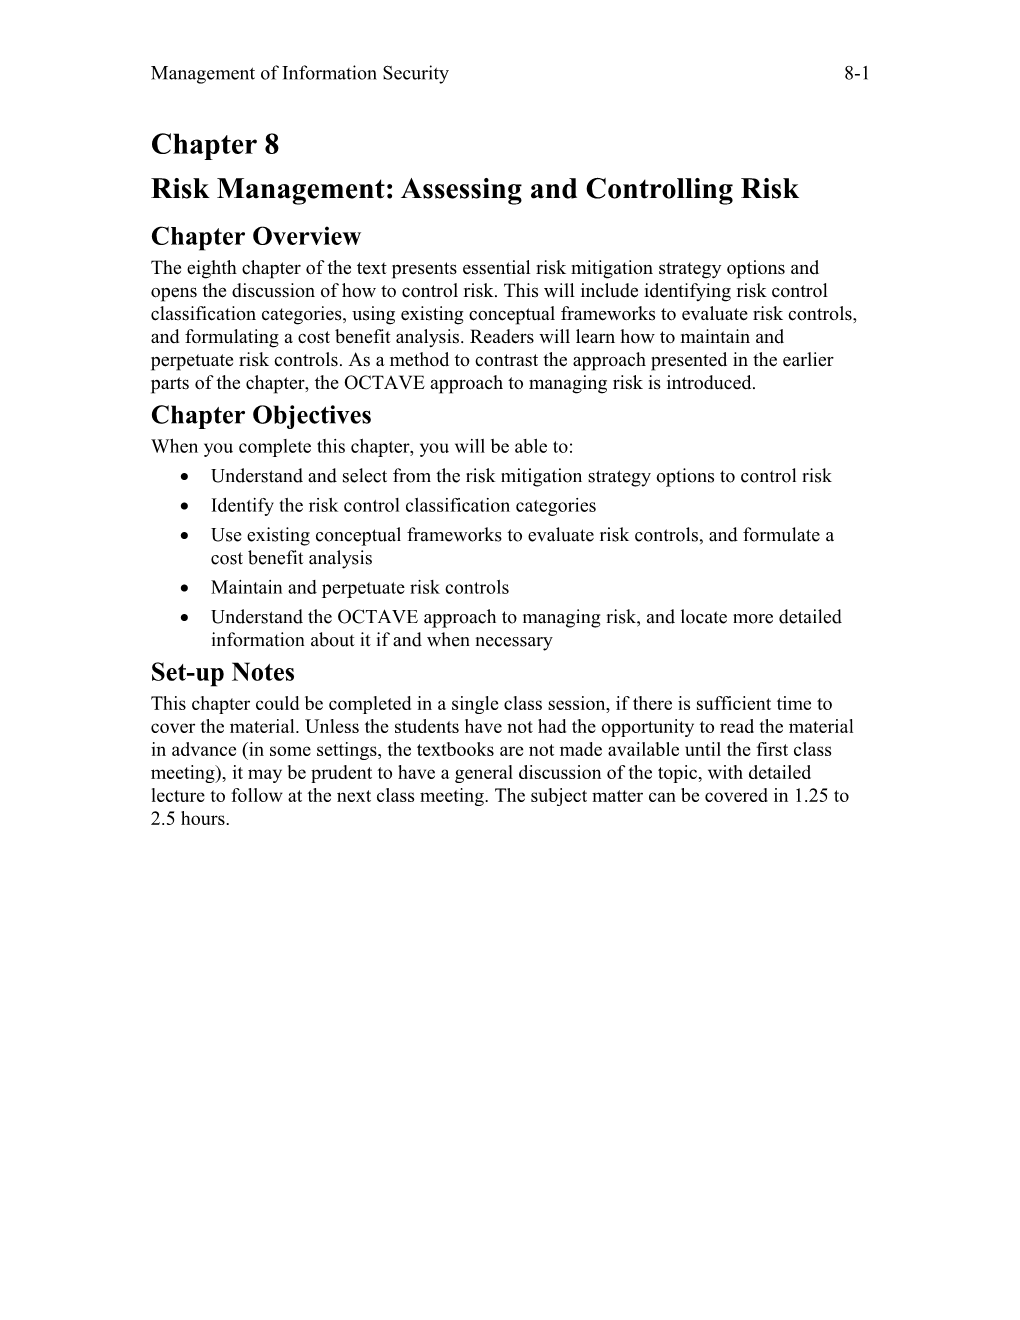 Risk Management:Assessing and Controlling Risk